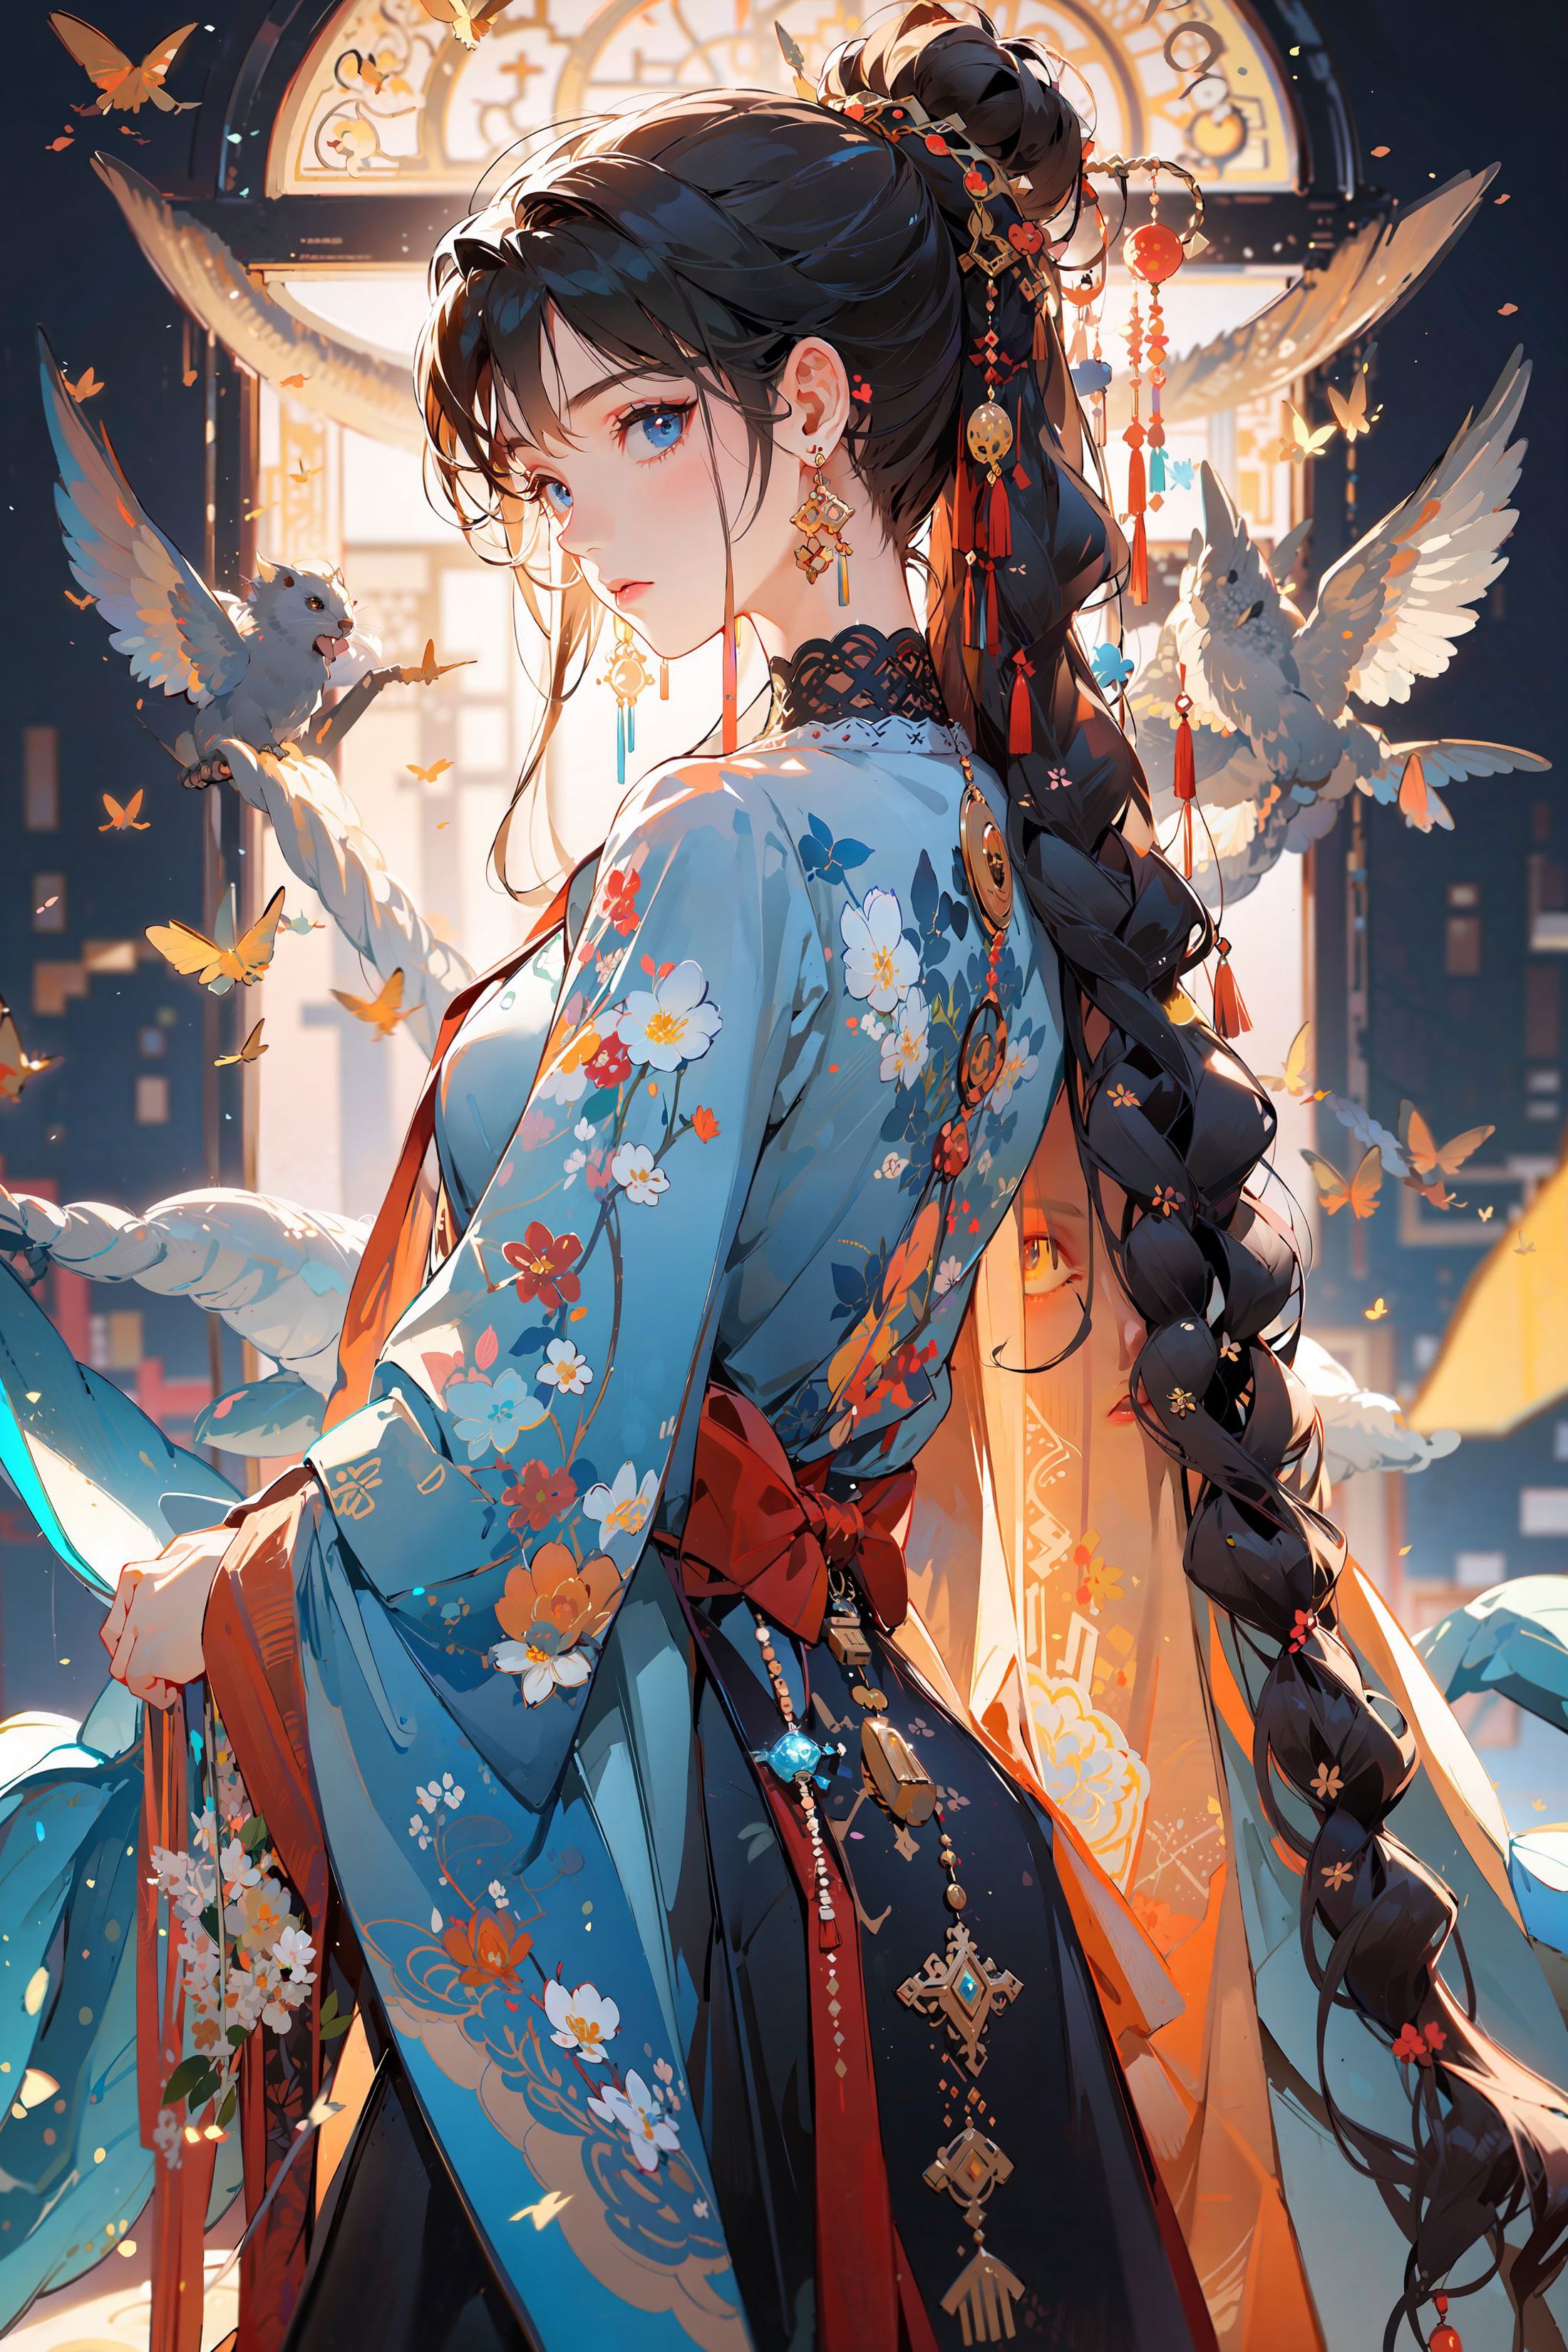 An anime girl with long black hair wearing a blue dress adorned with flowers and butterflies.